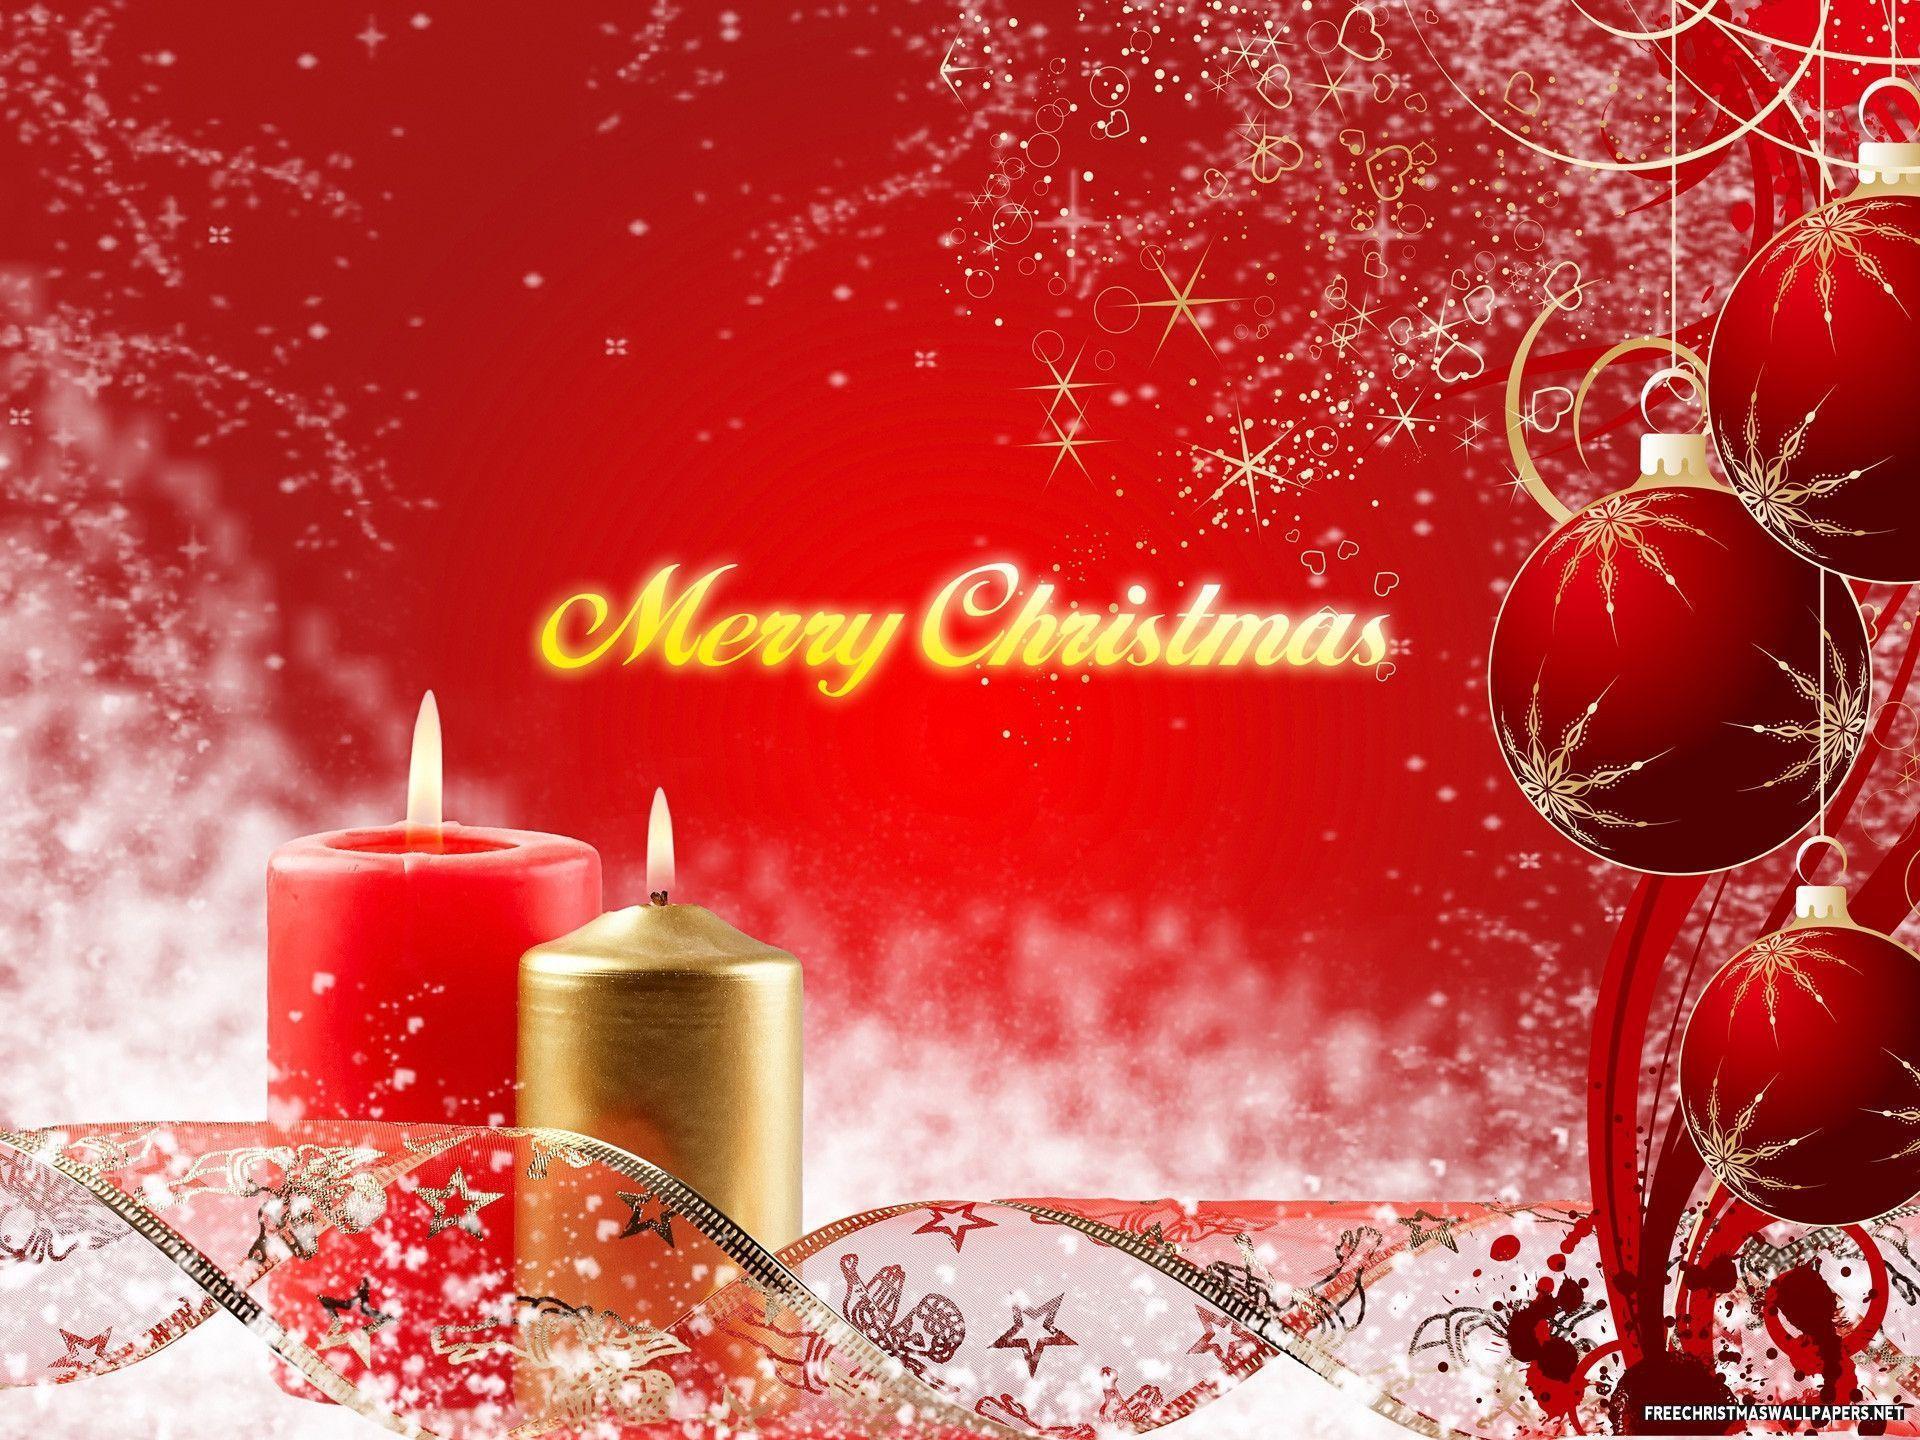 Merry Christmas to you wallpaper 2014 best wishes